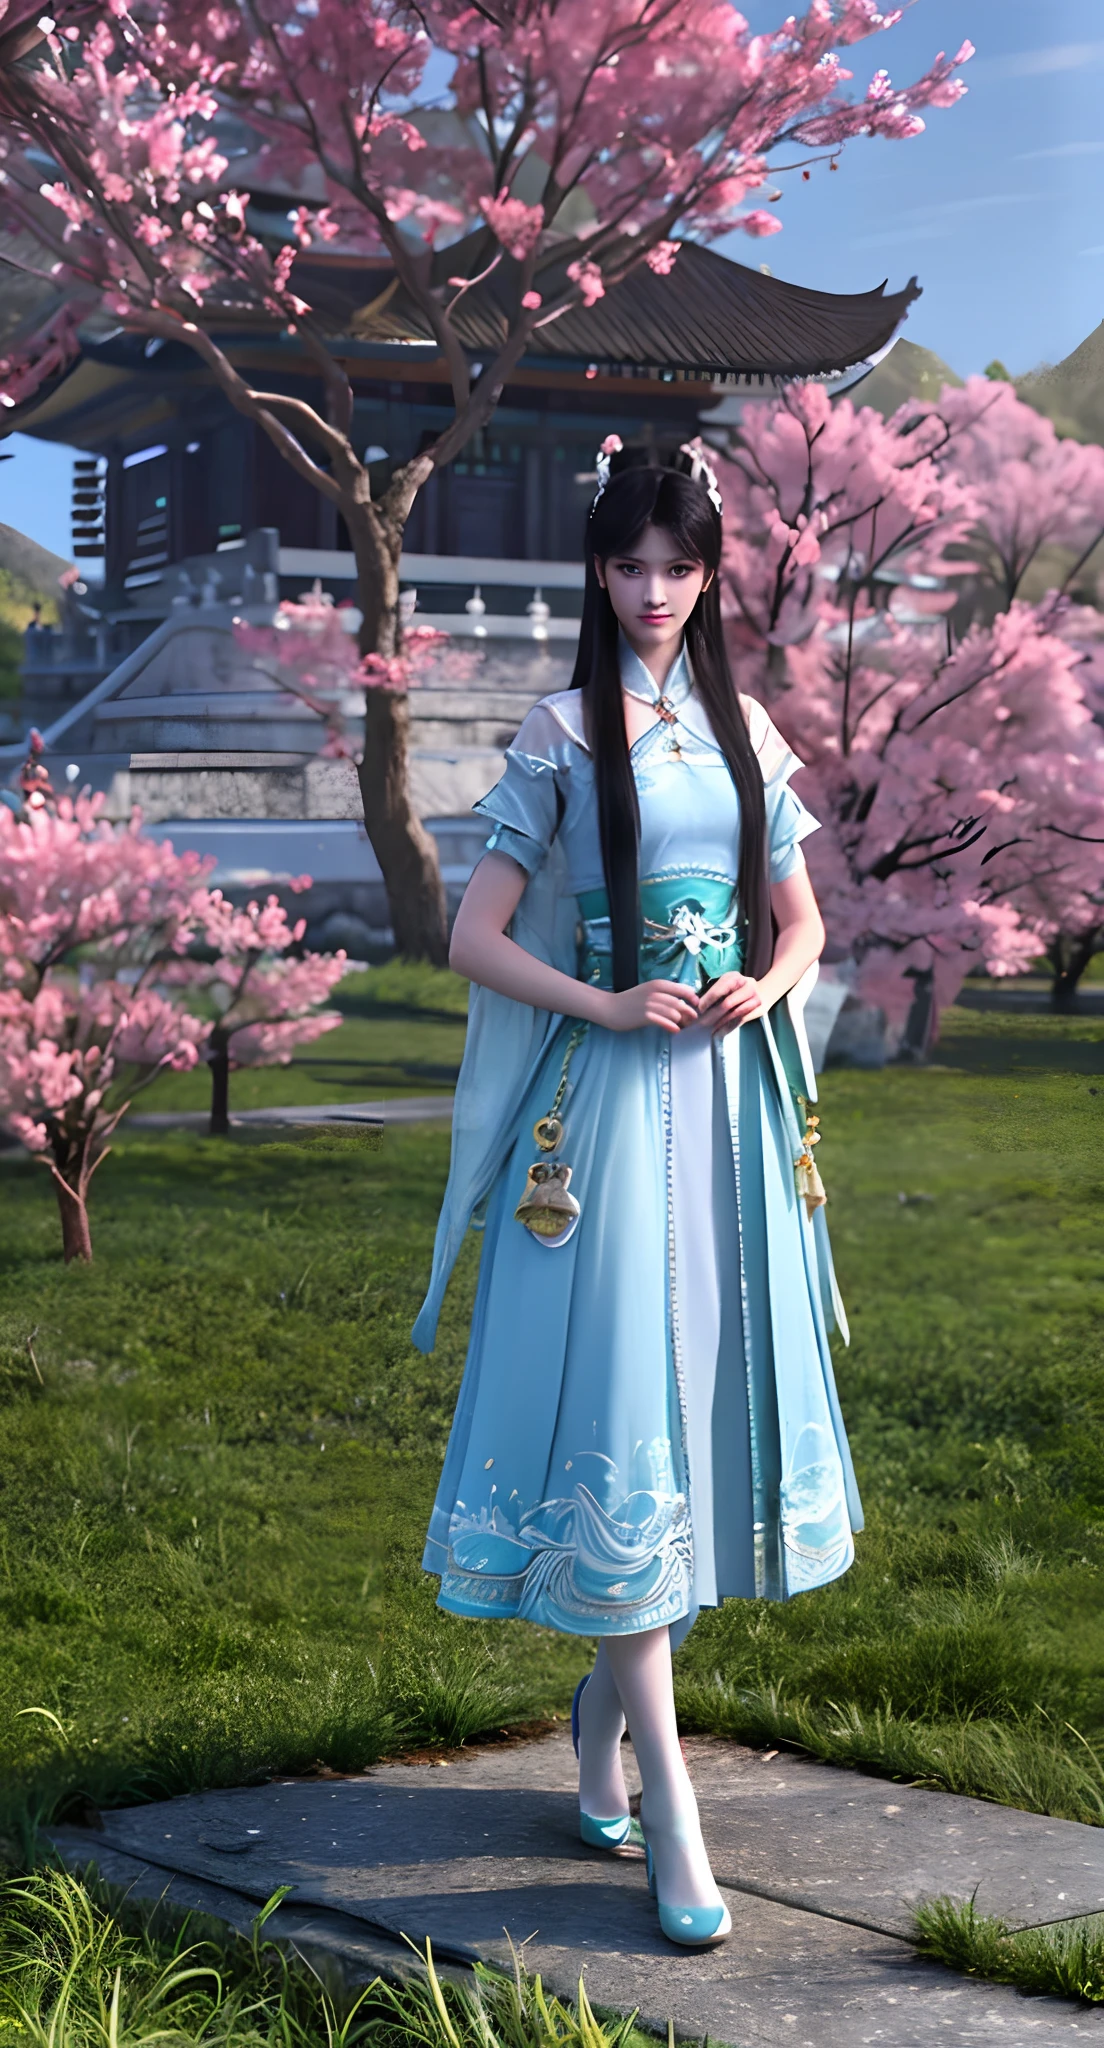 Araki in a blue and white dress stands on the grass, full-body xianxia, Inspired by Lan Ying, Inspired by Qiu Ying, inspired by Du Qiong, inspired by Li Mei-shu, Inspired by Li Tang, inspired by Leng Mei, Palace ， A girl in Hanfu, Chinese costume, heise jinyao